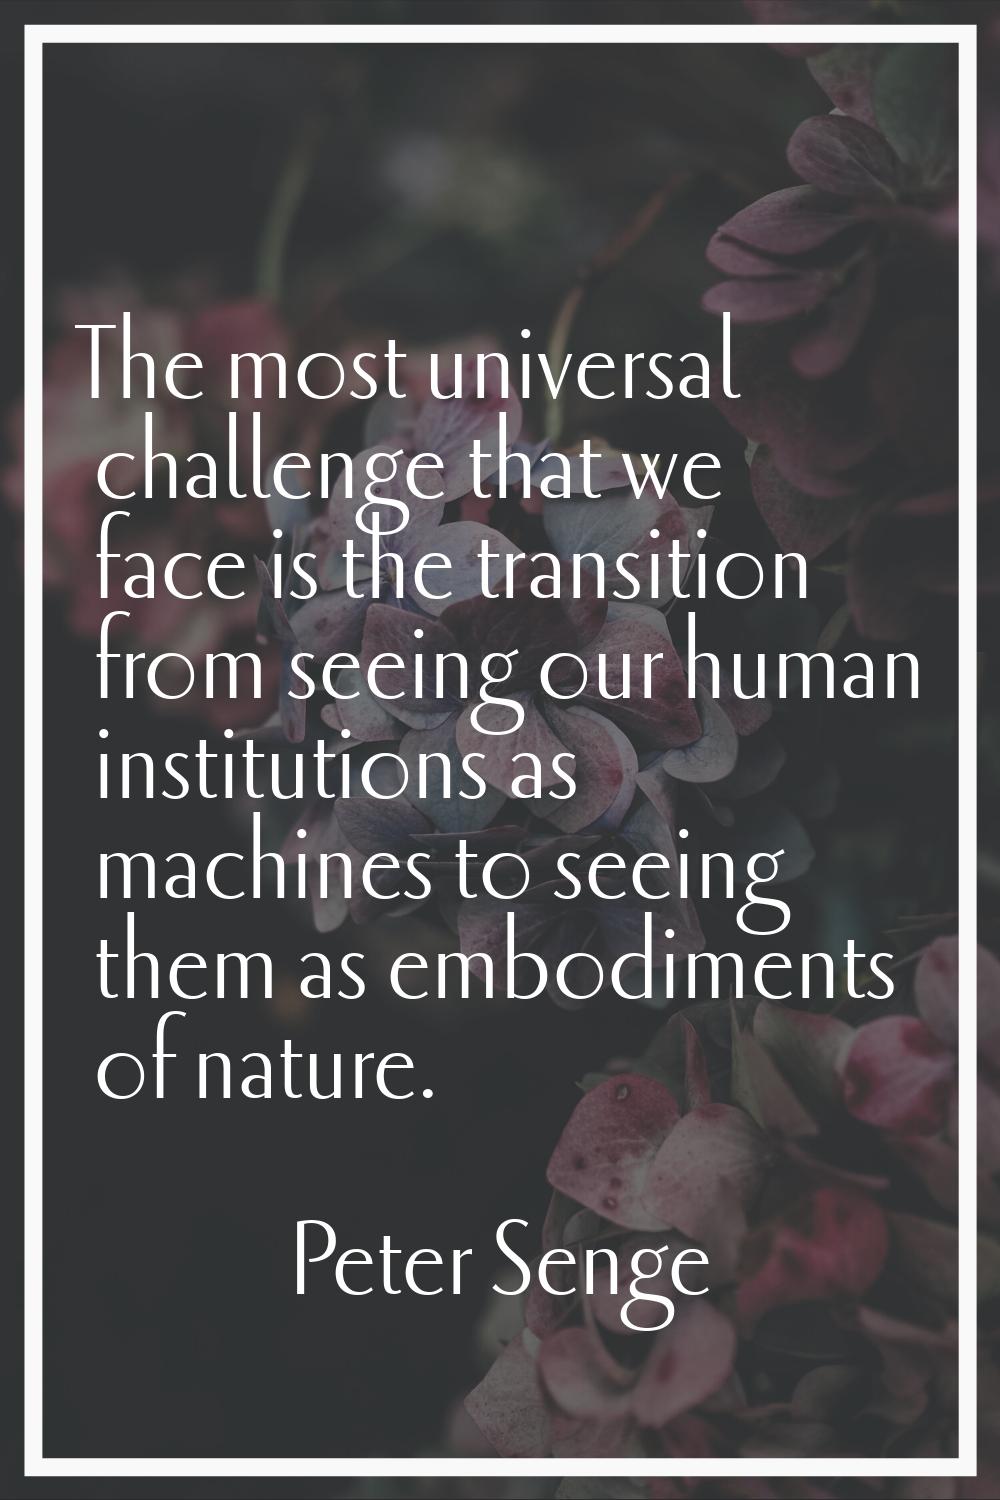 The most universal challenge that we face is the transition from seeing our human institutions as m